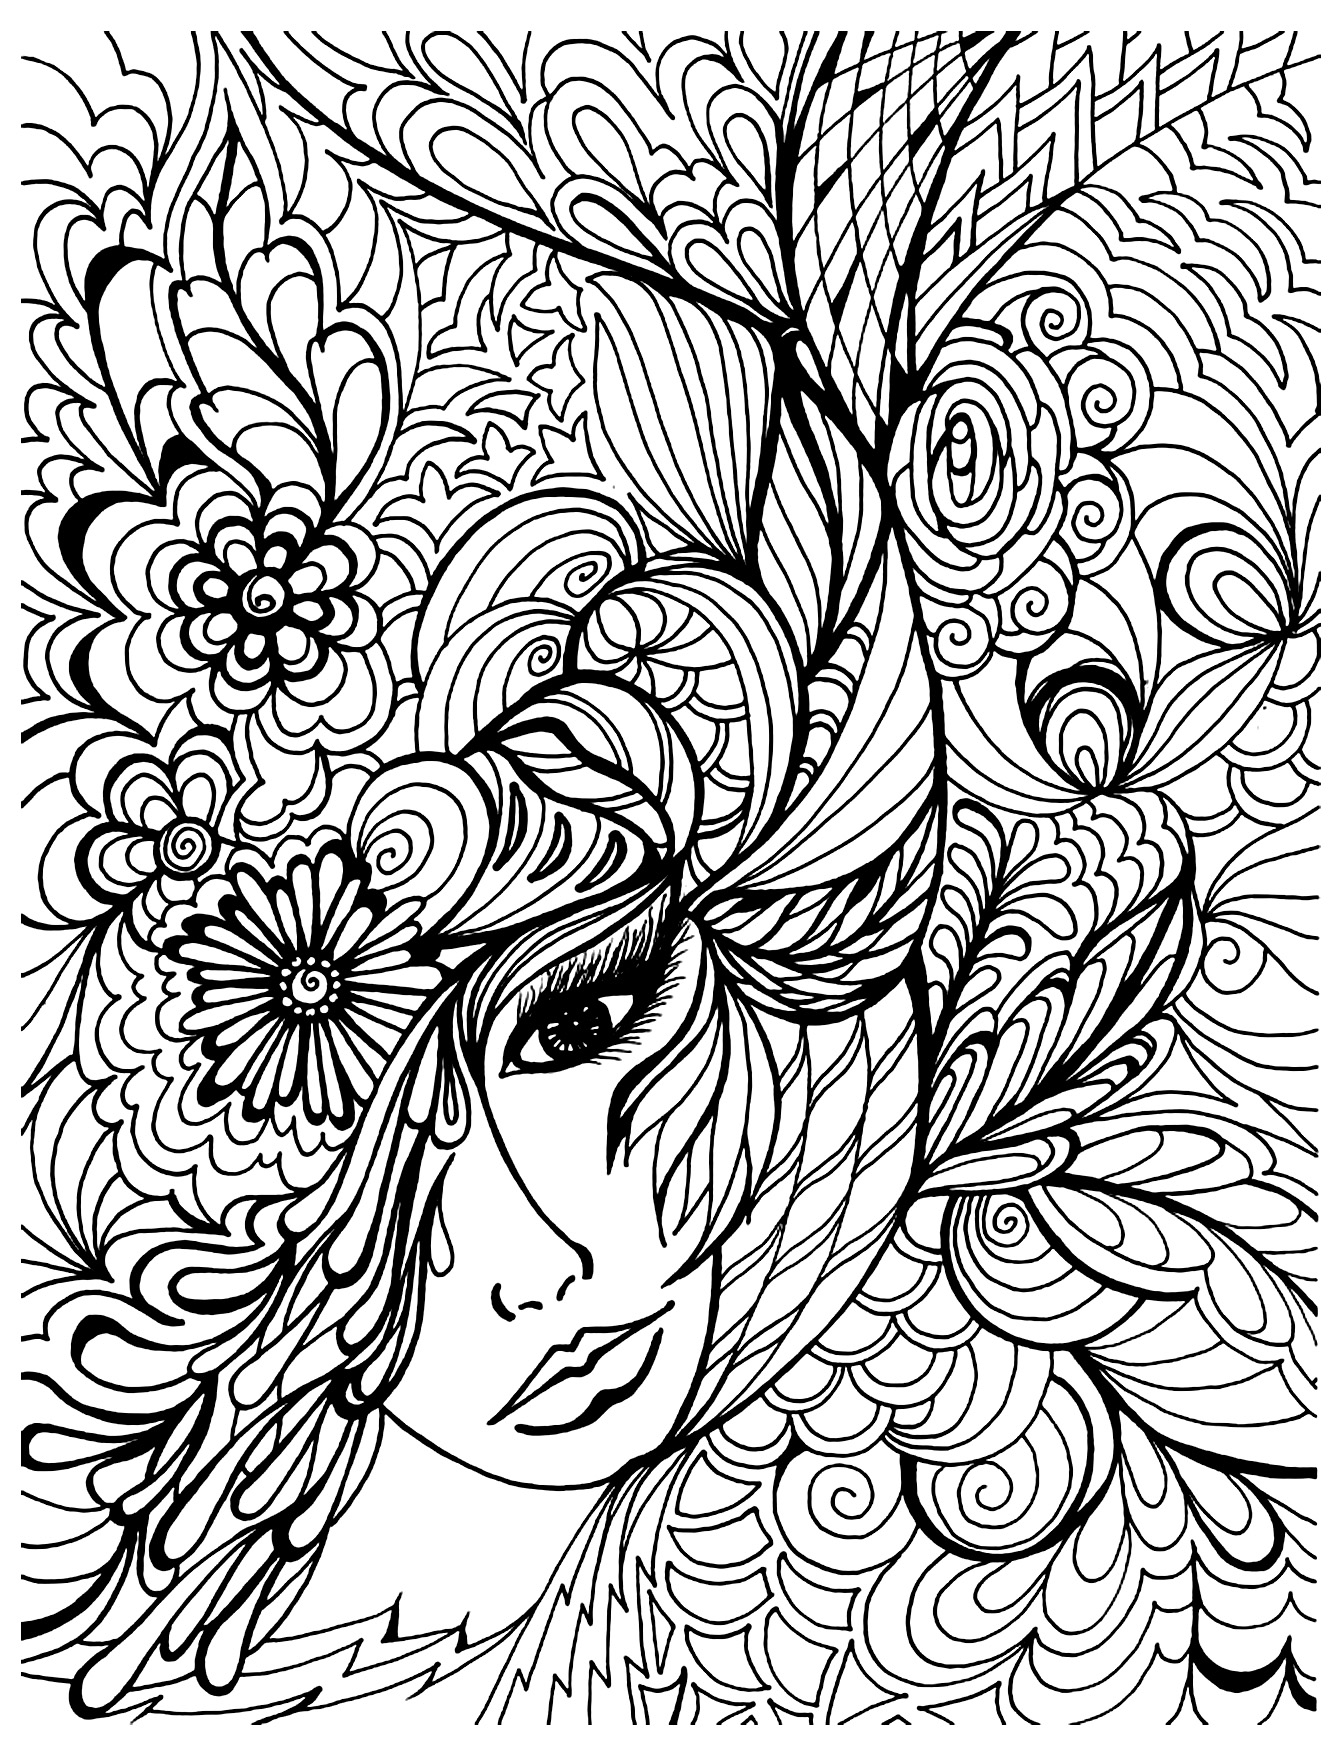 Download Face vegetation - Anti stress Adult Coloring Pages - Page 2/